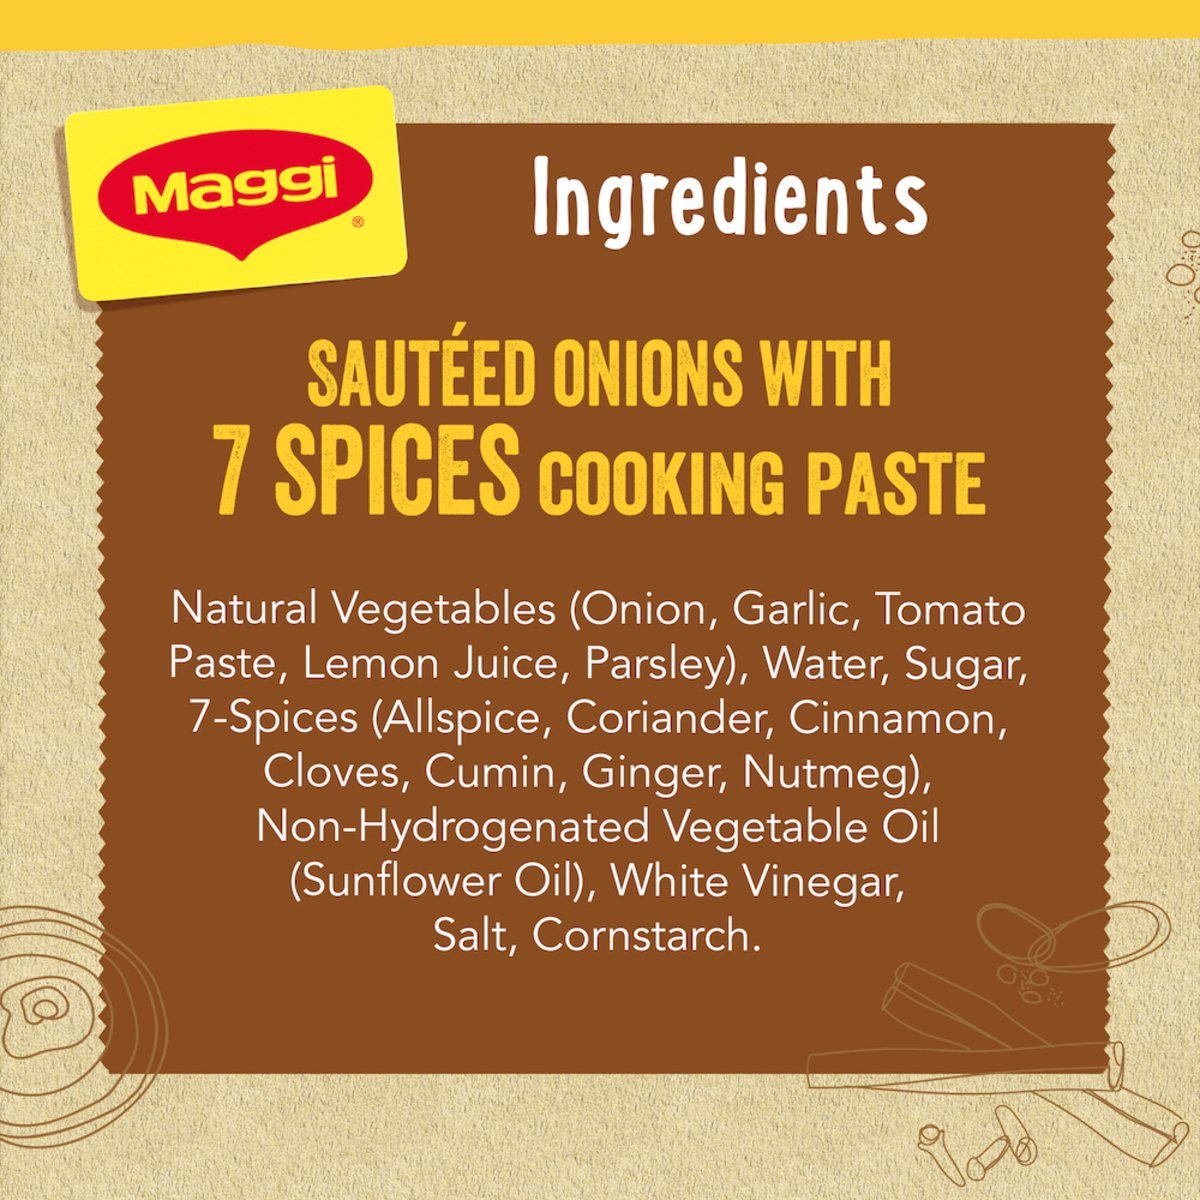 Maggi Sauteed Onions With 7 Spices Cooking Paste Value Pack 200 g